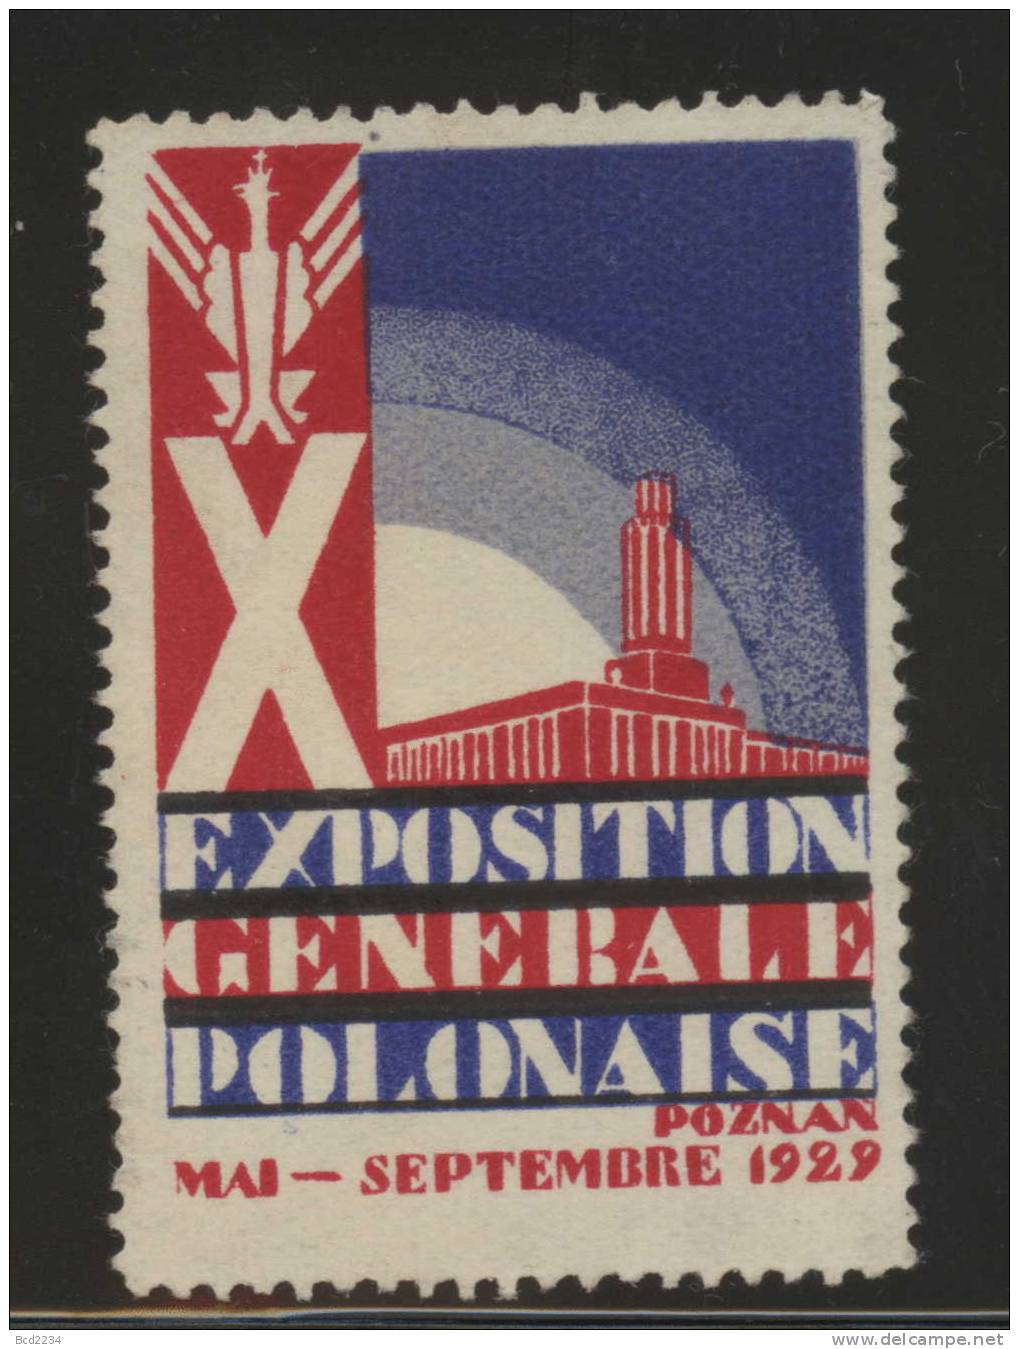 POLAND 1929 POZNAN EXHIBITION TRADE FAIR POSTER STAMP TYPE 5 FRENCH WRITING NO GUM - Fiscali